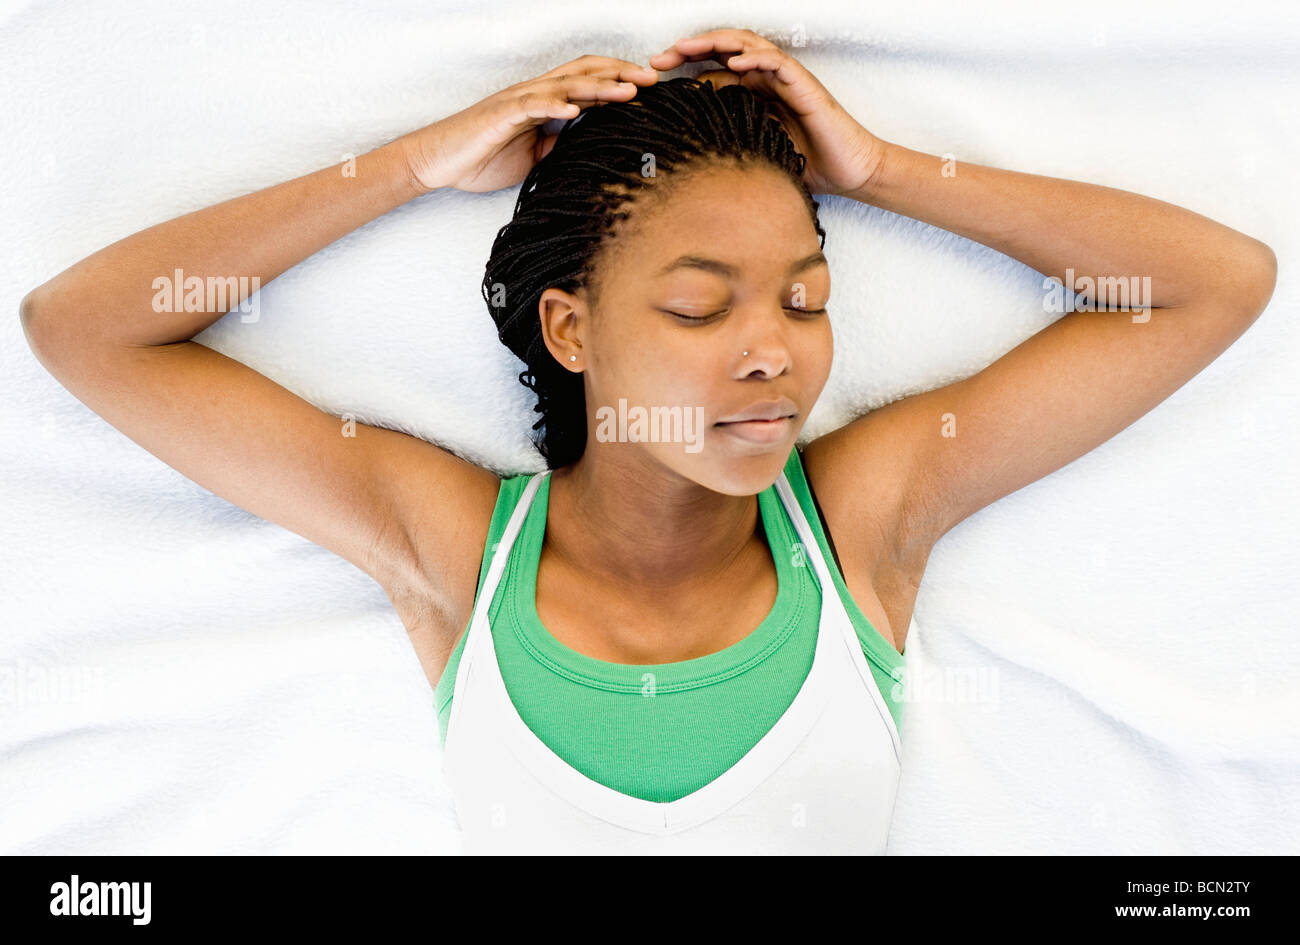 A young woman calmly sleeping on a white blanket with arms upraised Stock Photo